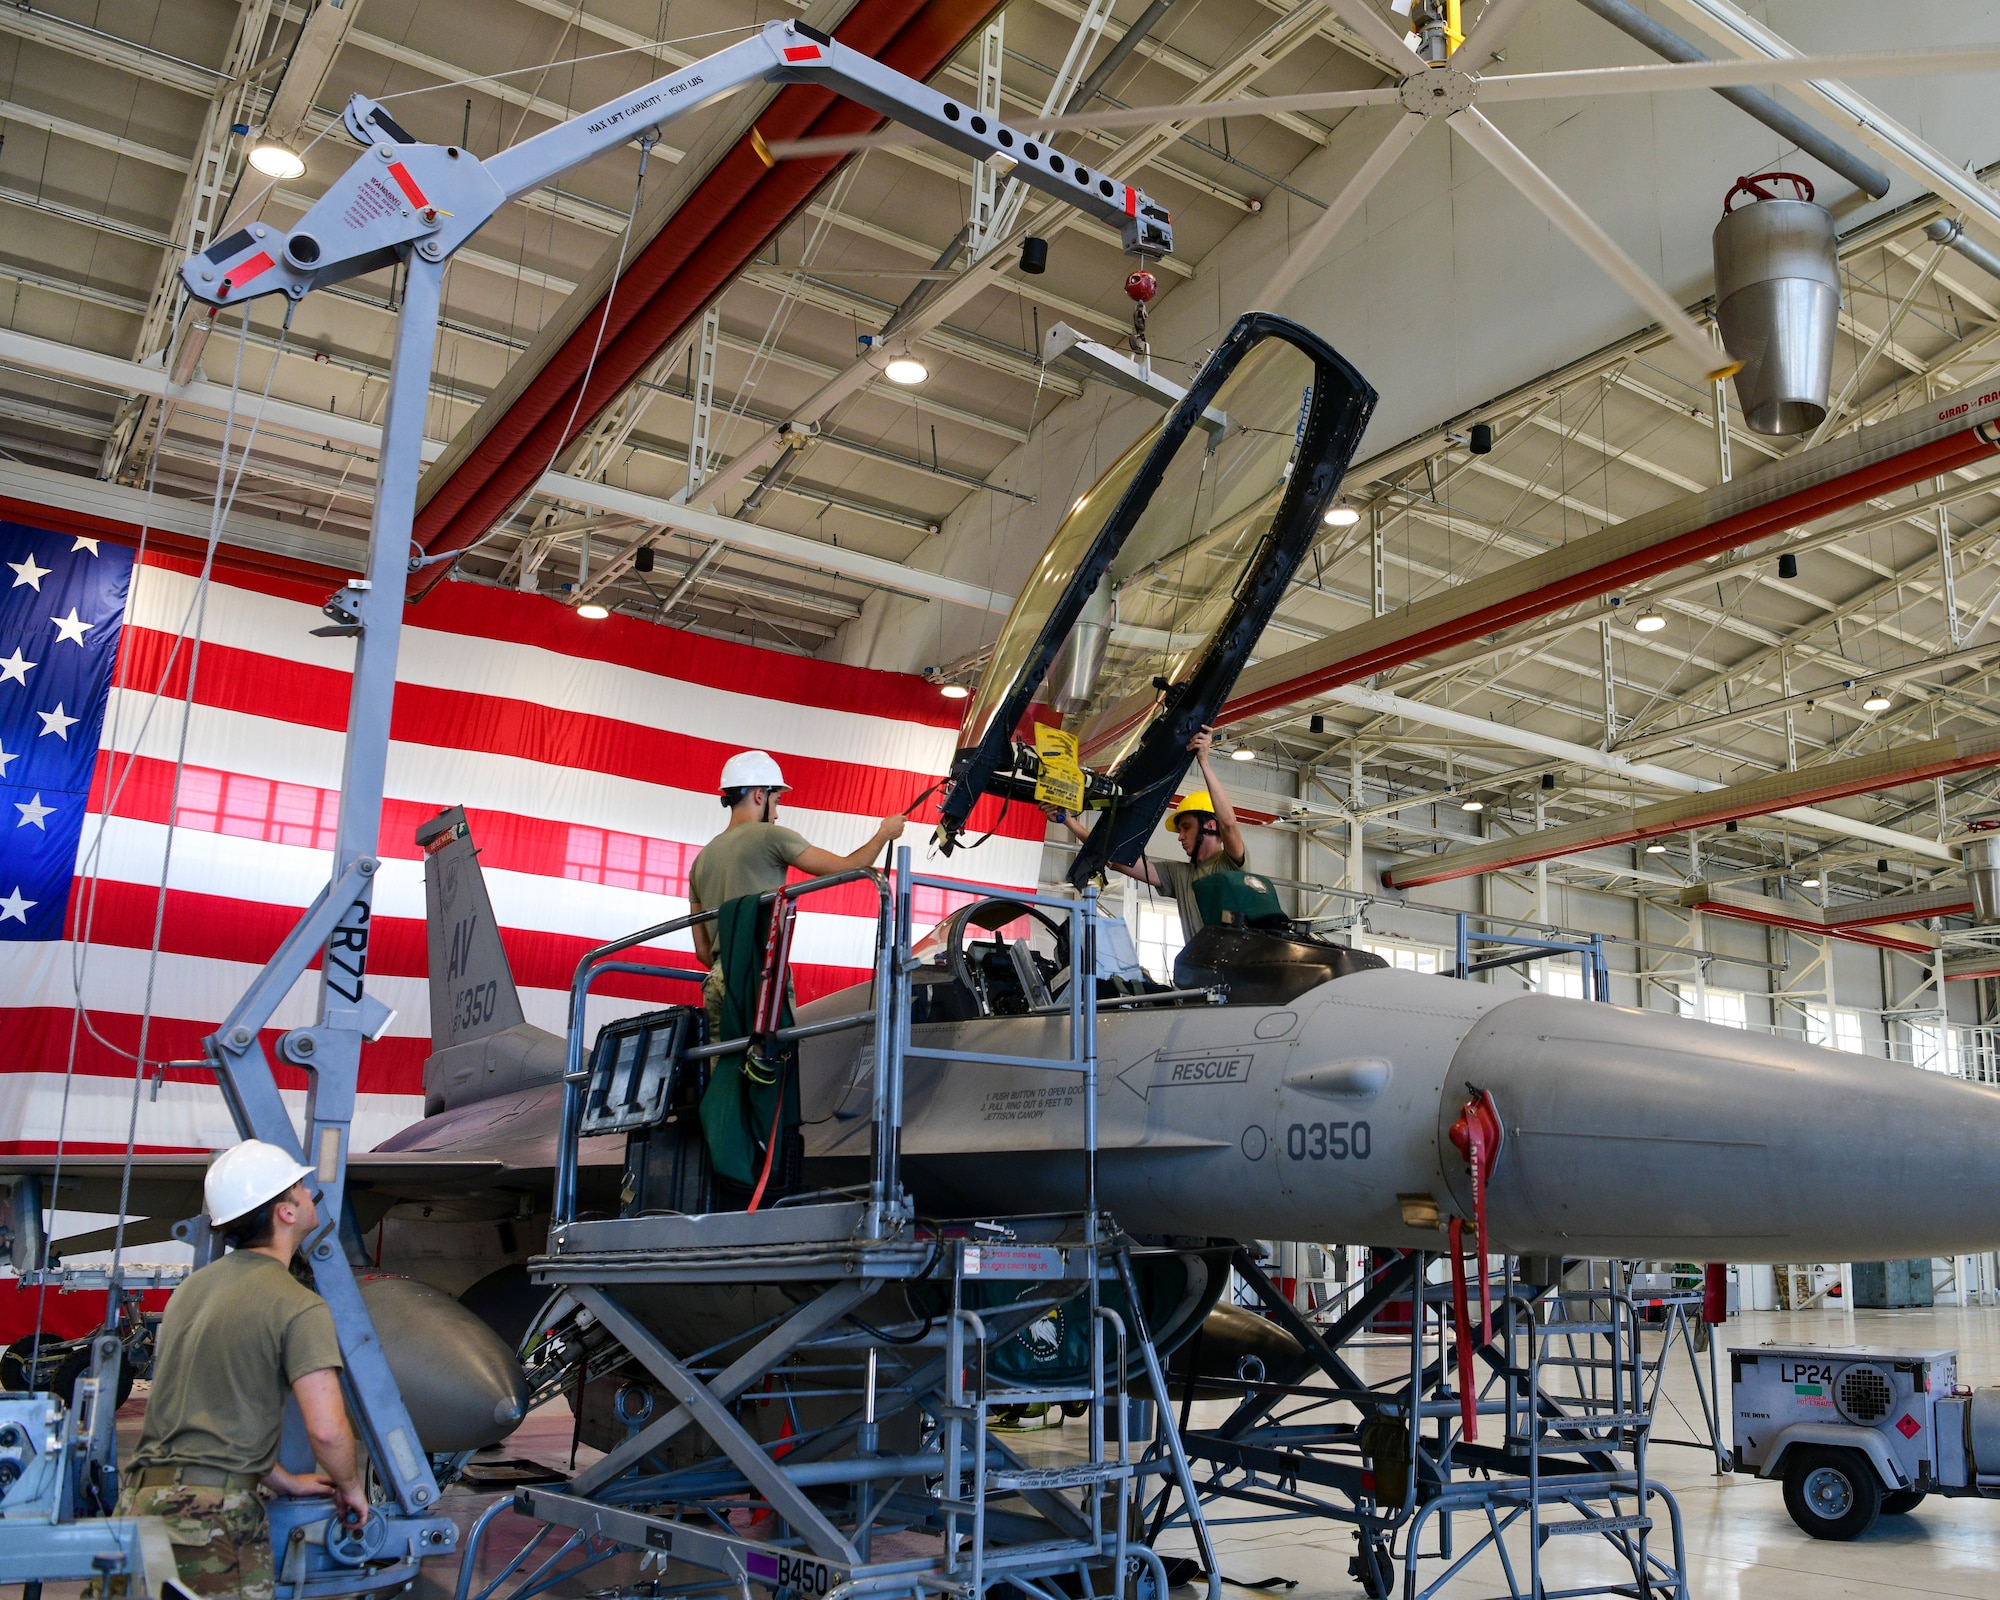 U.S. Air Force Airmen assigned to the 31st Maintenance Squadron Egress shop place a canopy onto an F-16 Fighting Falcon at Aviano Air Base, Italy, Aug. 11, 2022. Aviano was chosen as one of six bases across multiple major commands that have different environmental factors to test a new Luna transparency for the F-16 canopy. (U.S. Air Force photo by Senior Airman Brooke Moeder)